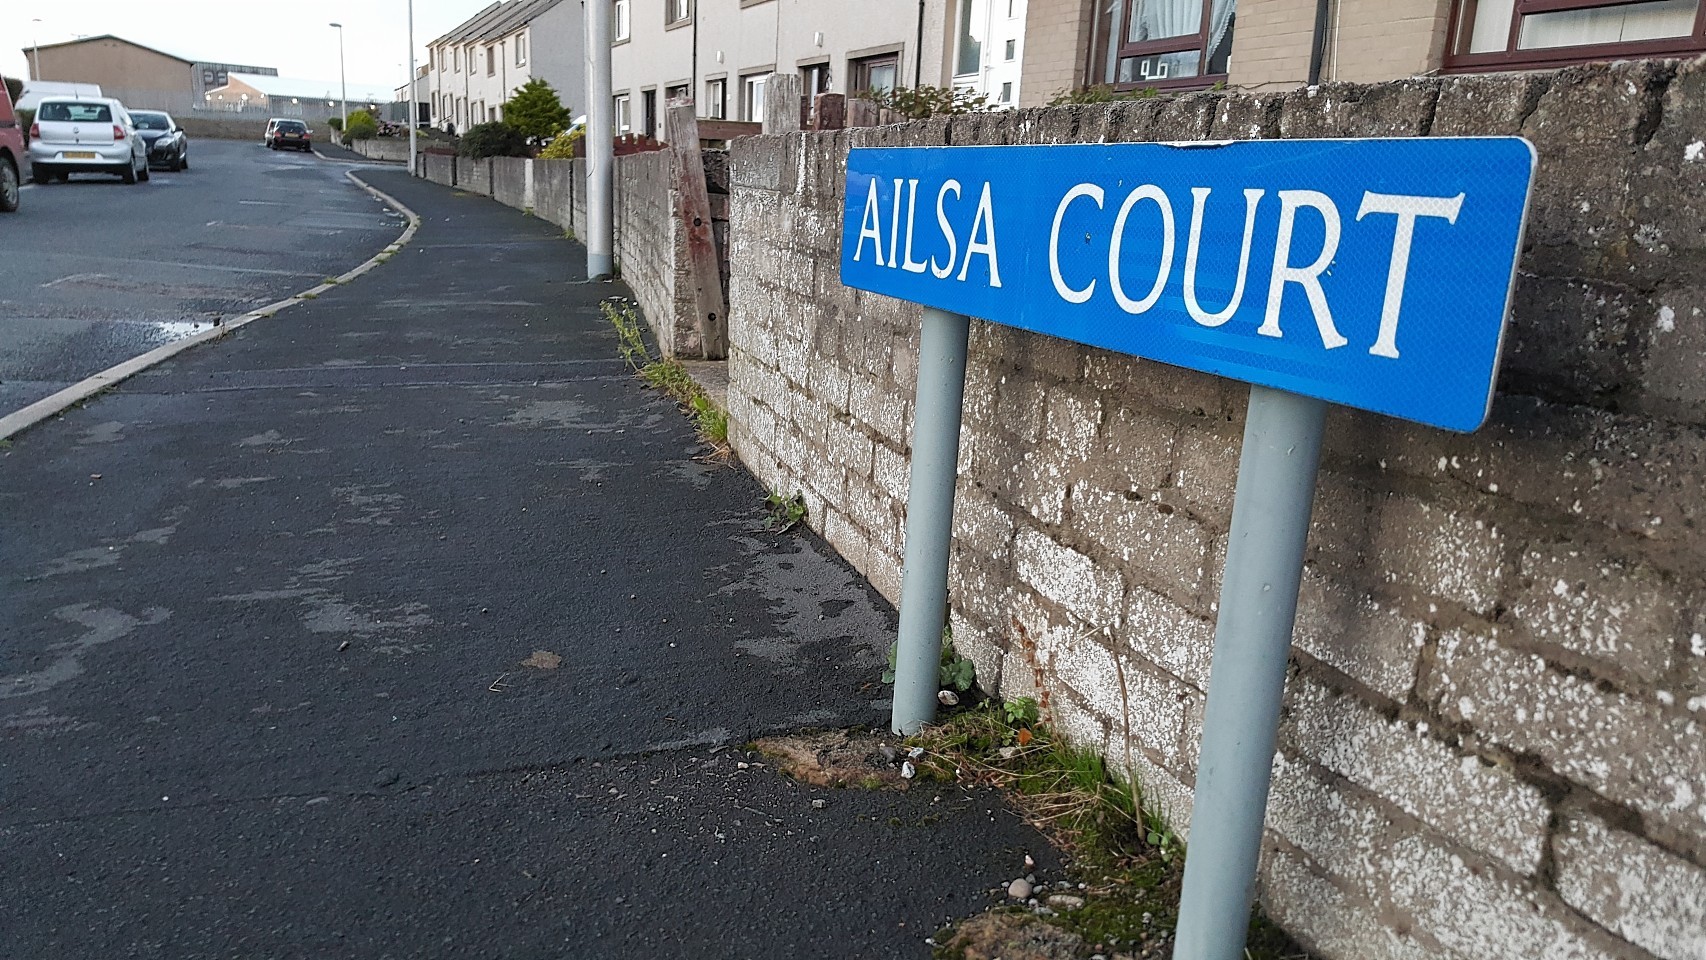 The 58-year-old was found on Ailsa Court